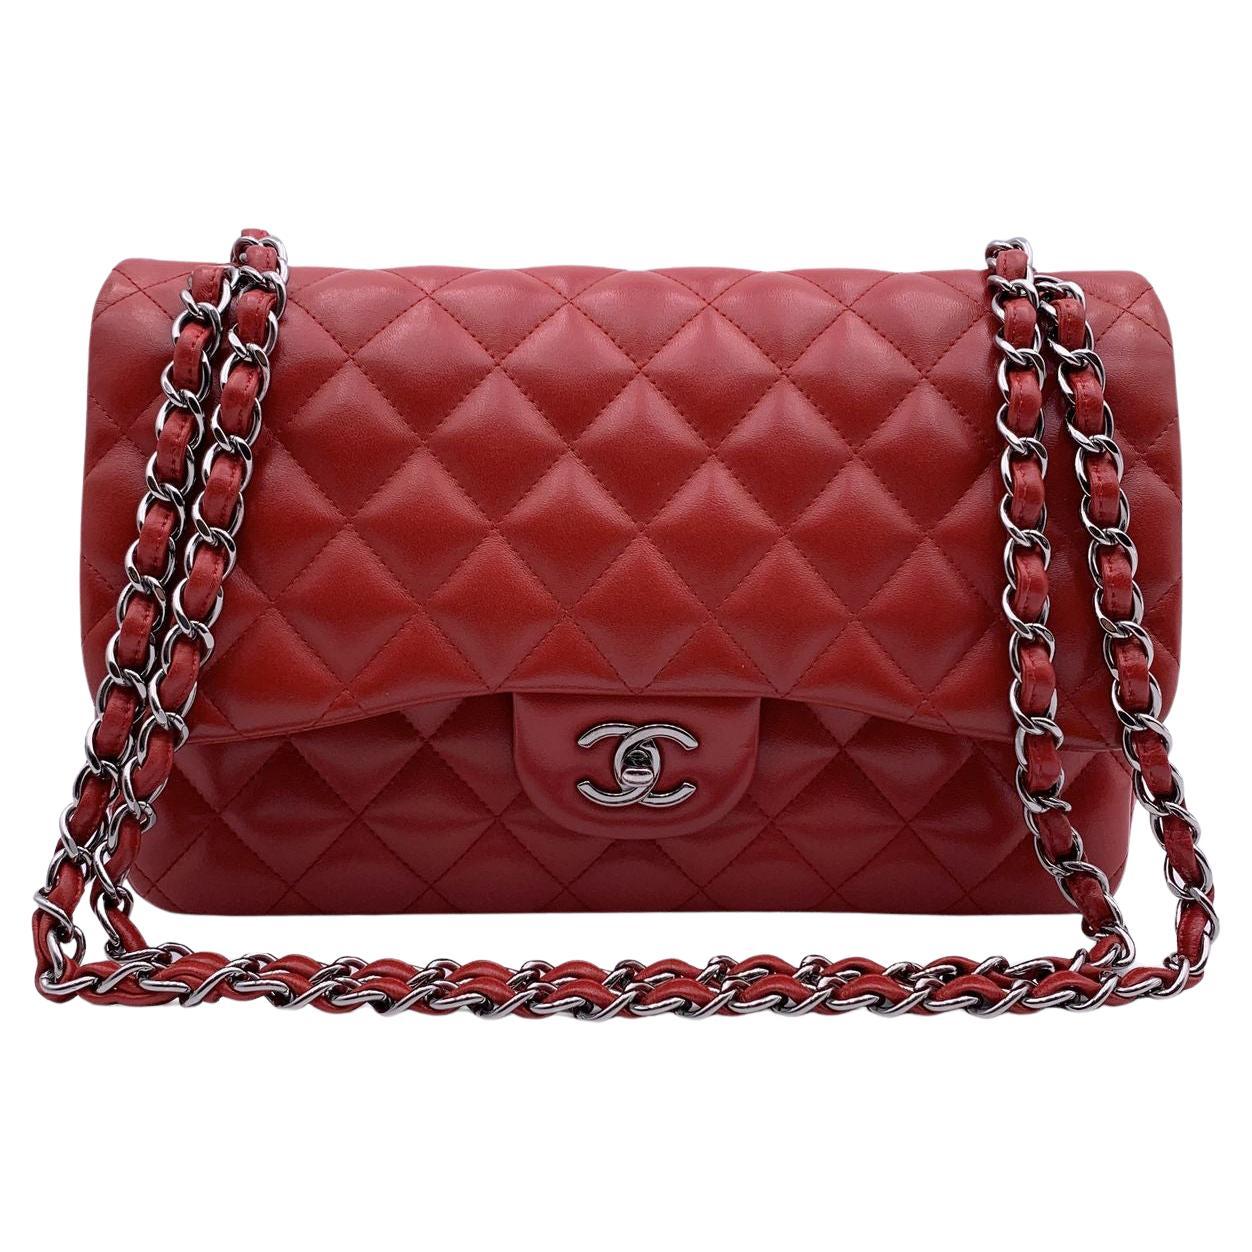 Chanel Red Quilted Jumbo Timeless Classic Shoulder Bag 30 cm For Sale